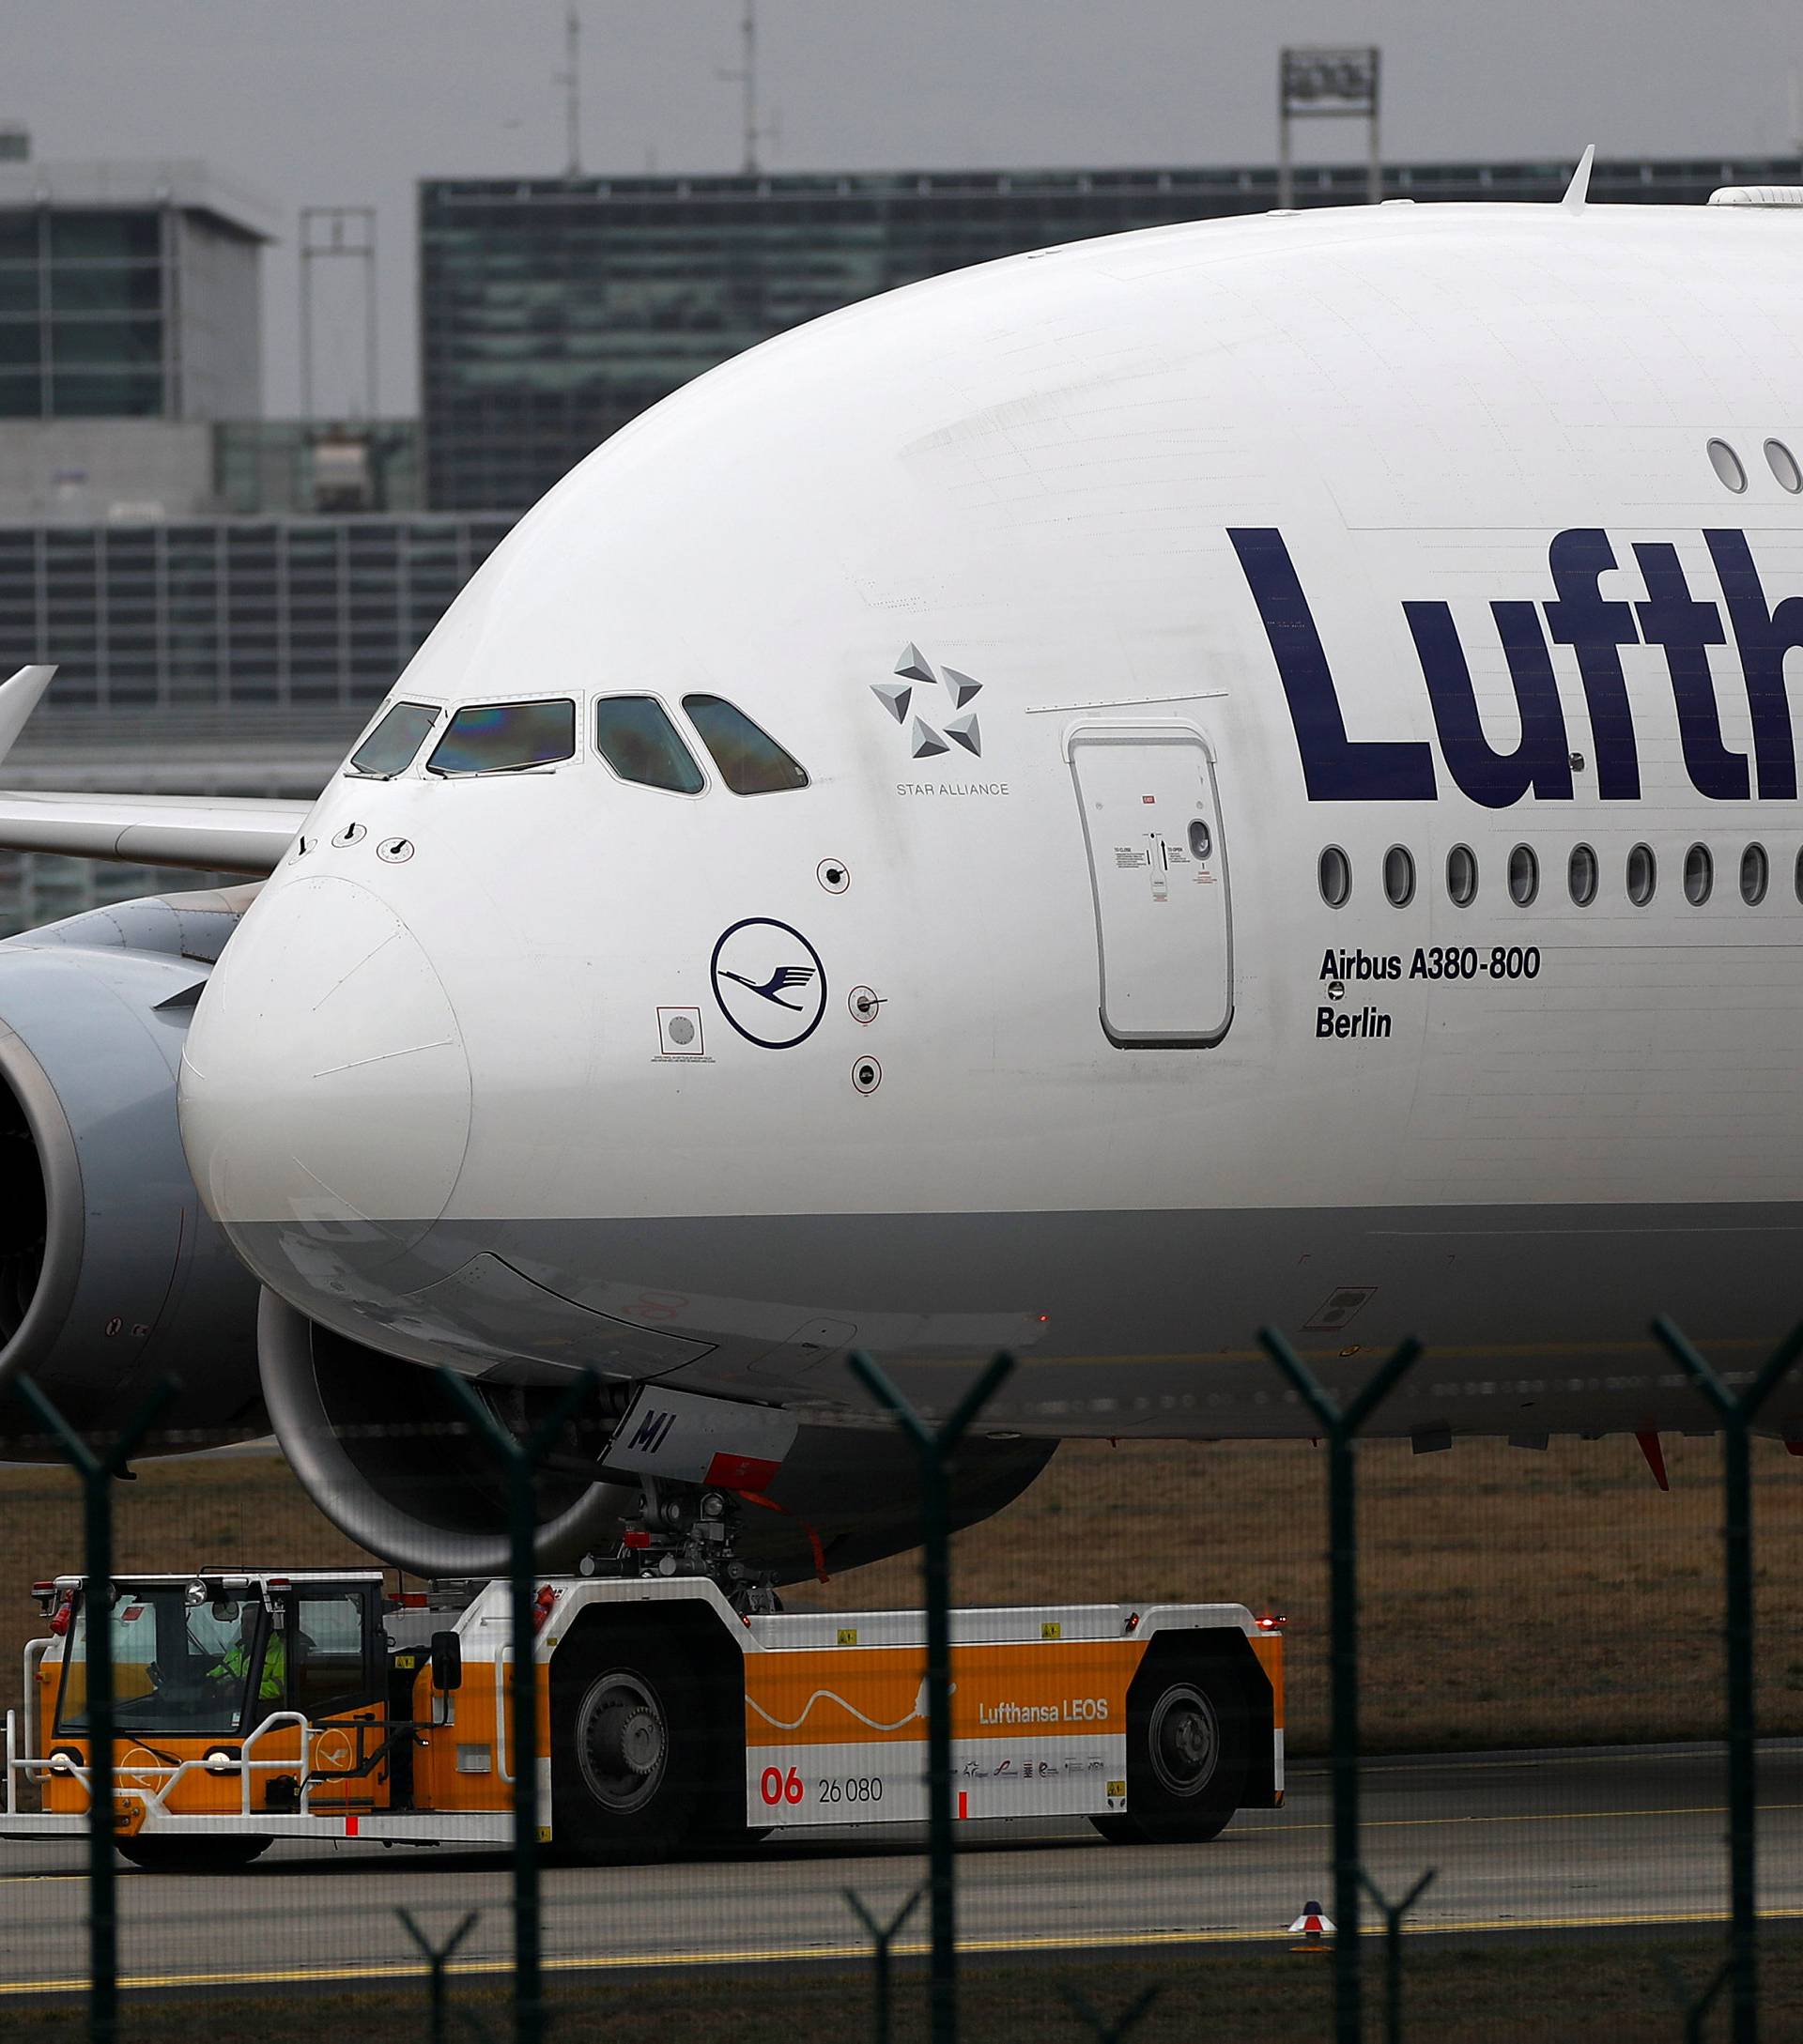 An Airbus A380 of German air carrier Lufthansa is seen at the airport in Frankfurt